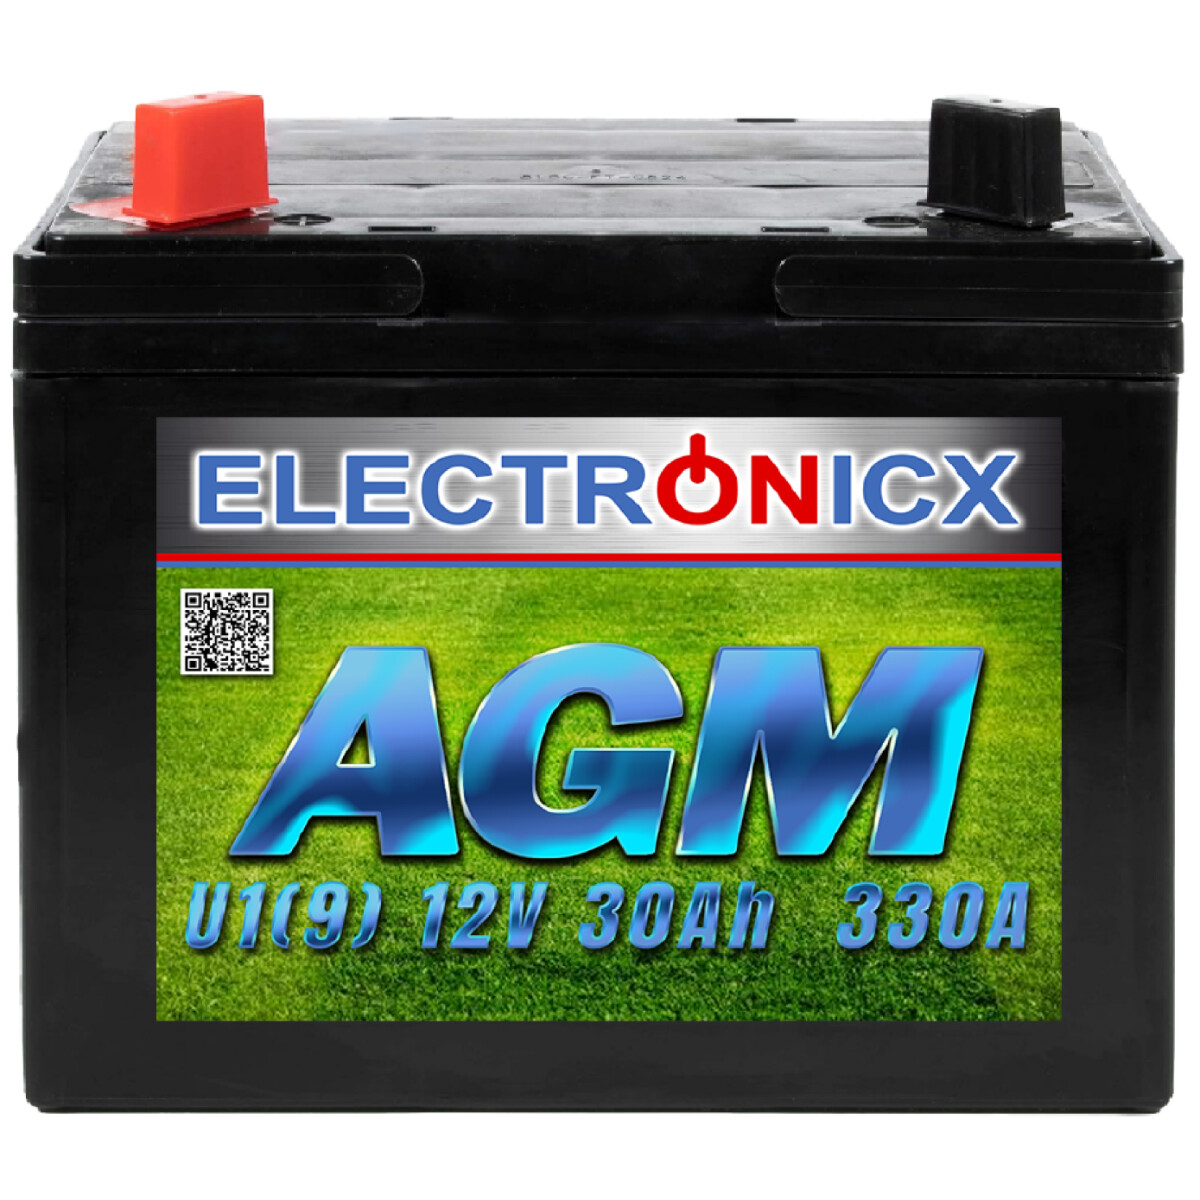 Electronicx u1(9) agm 30ah 330a battery lawn tractor riding lawn mower